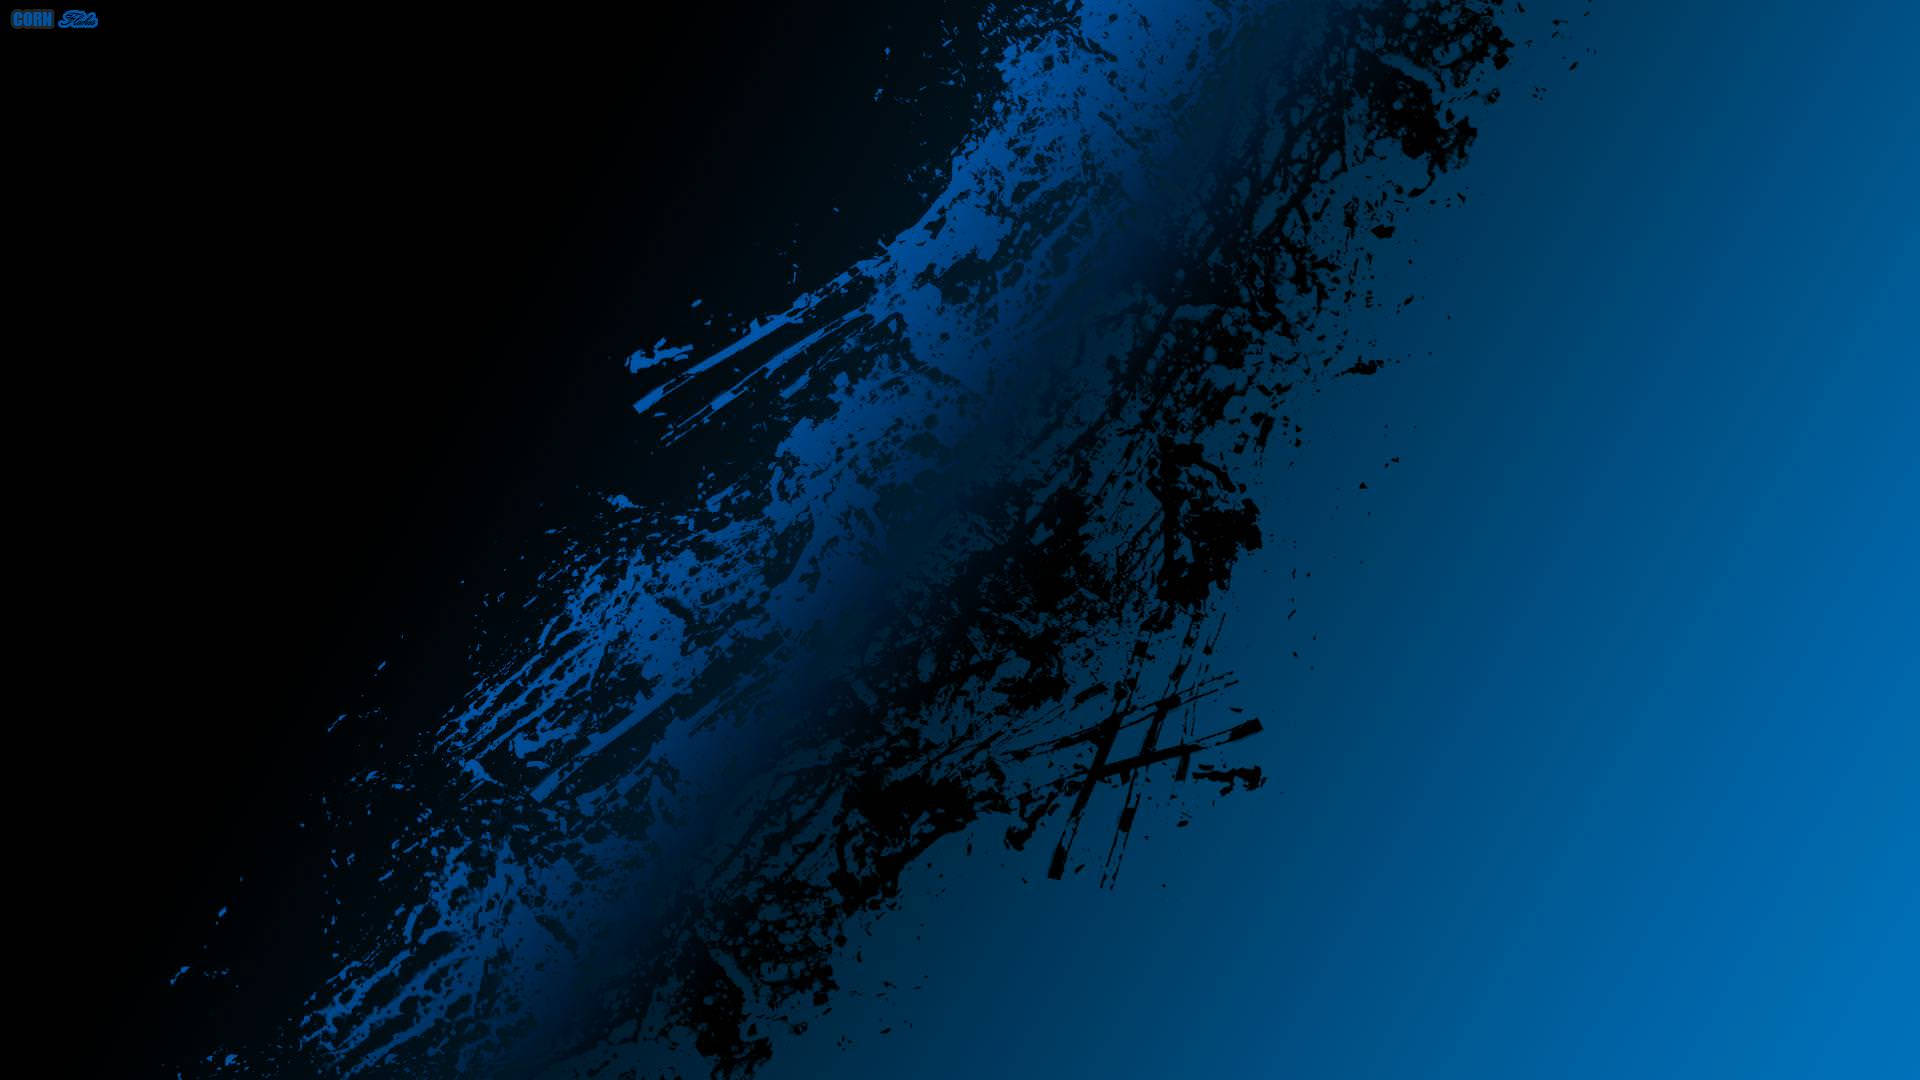 Dark Blue Abstract Wallpapers